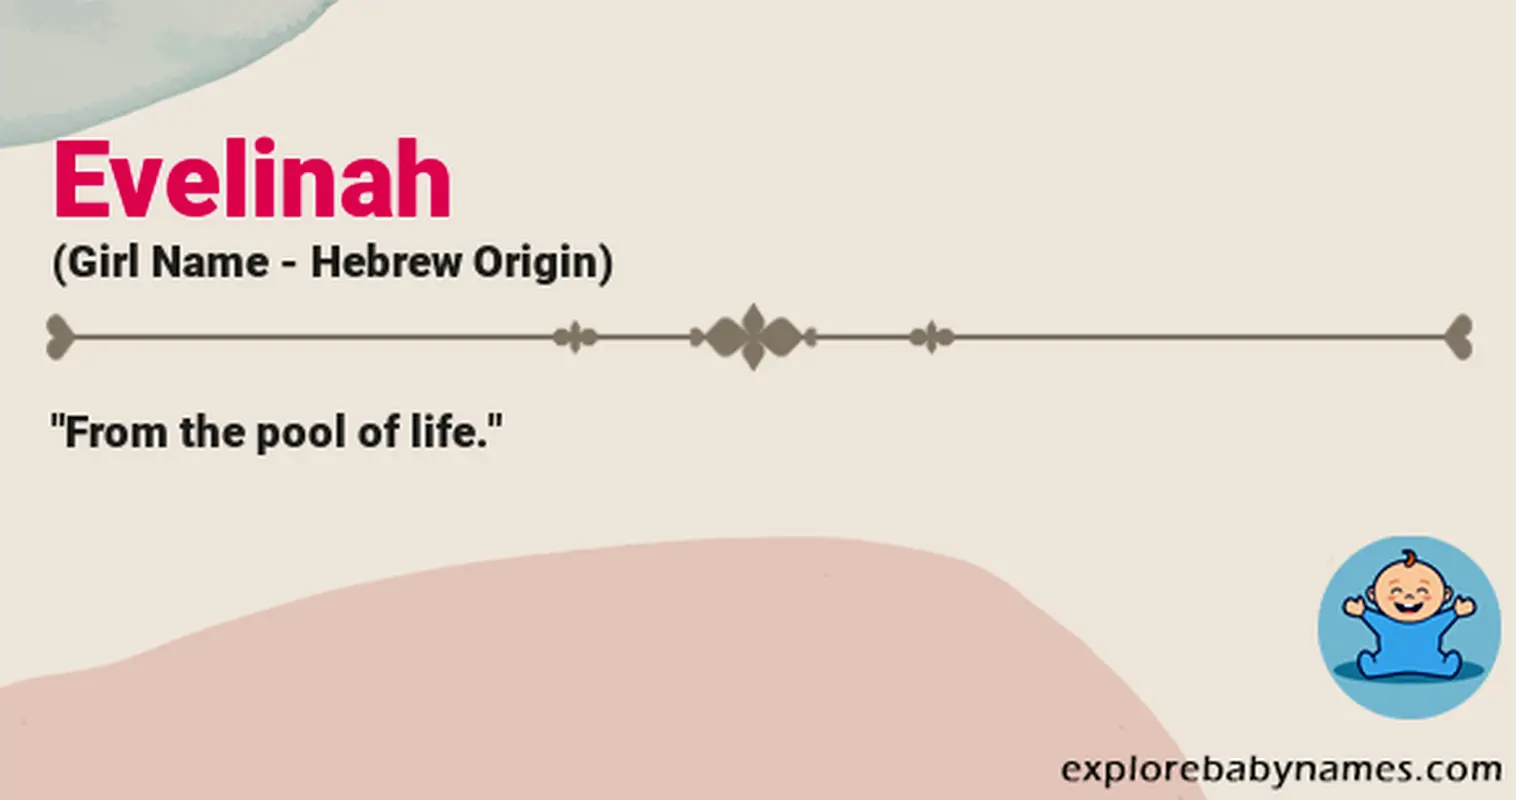 Meaning of Evelinah